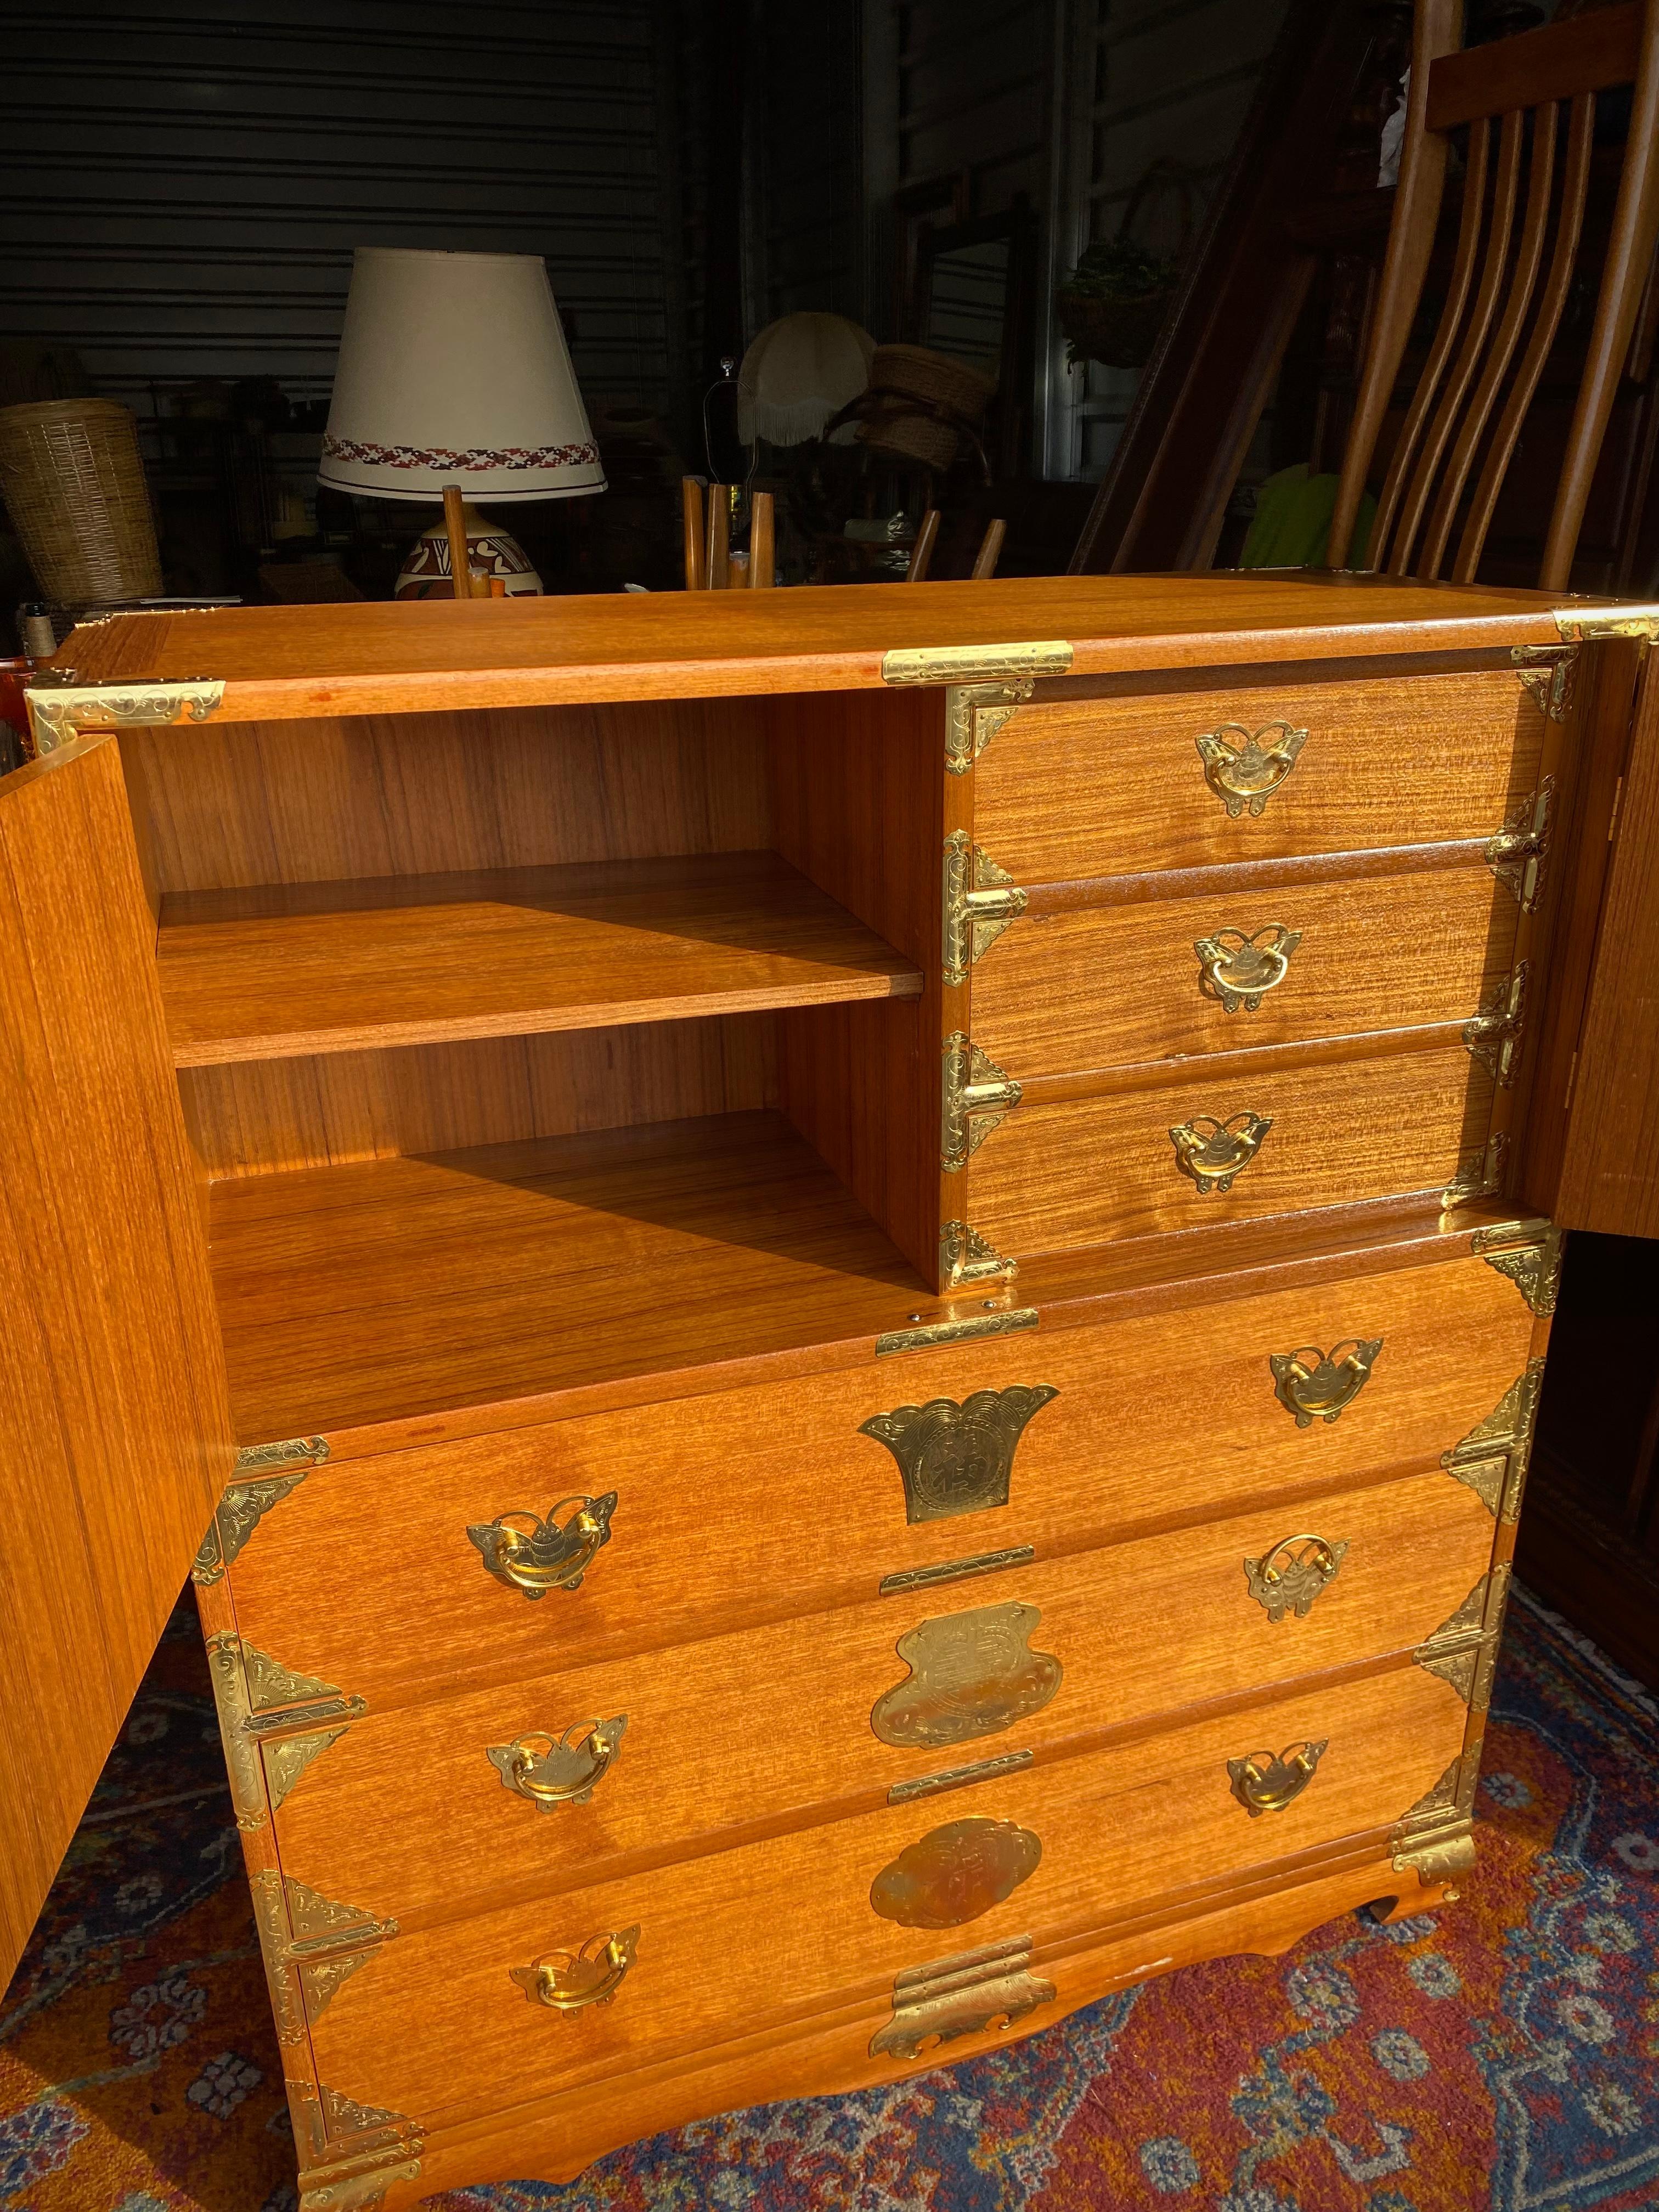 Gorgeous dresser piece, circa 1900s. Beautiful gold pulls accent the sleek modern design. Tons of storage space. Such a coveted piece. 